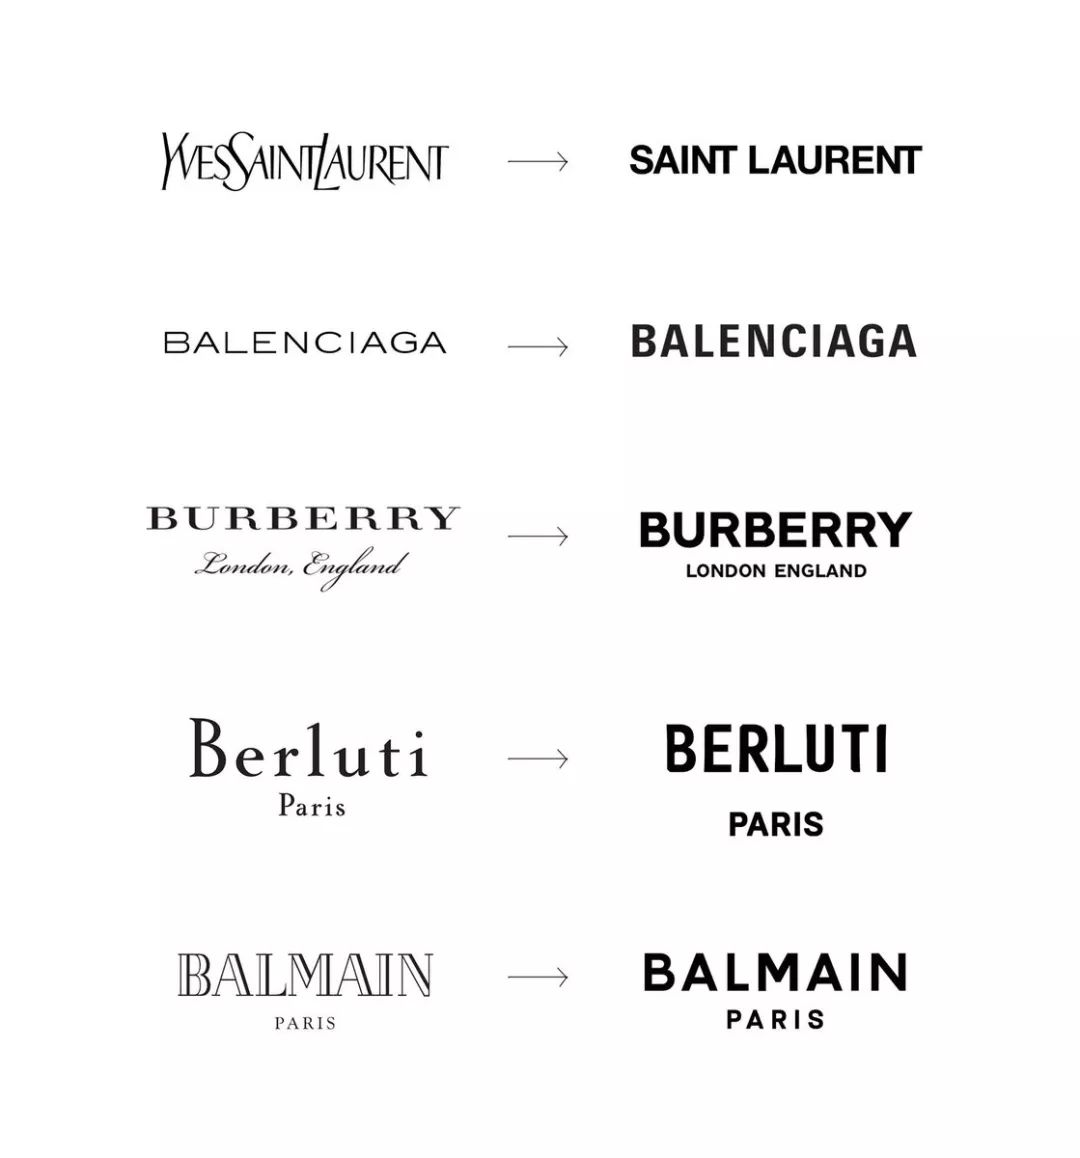 Accelerate rejuvenation. Last year, a total of 10 luxury fashion brands changed their logos